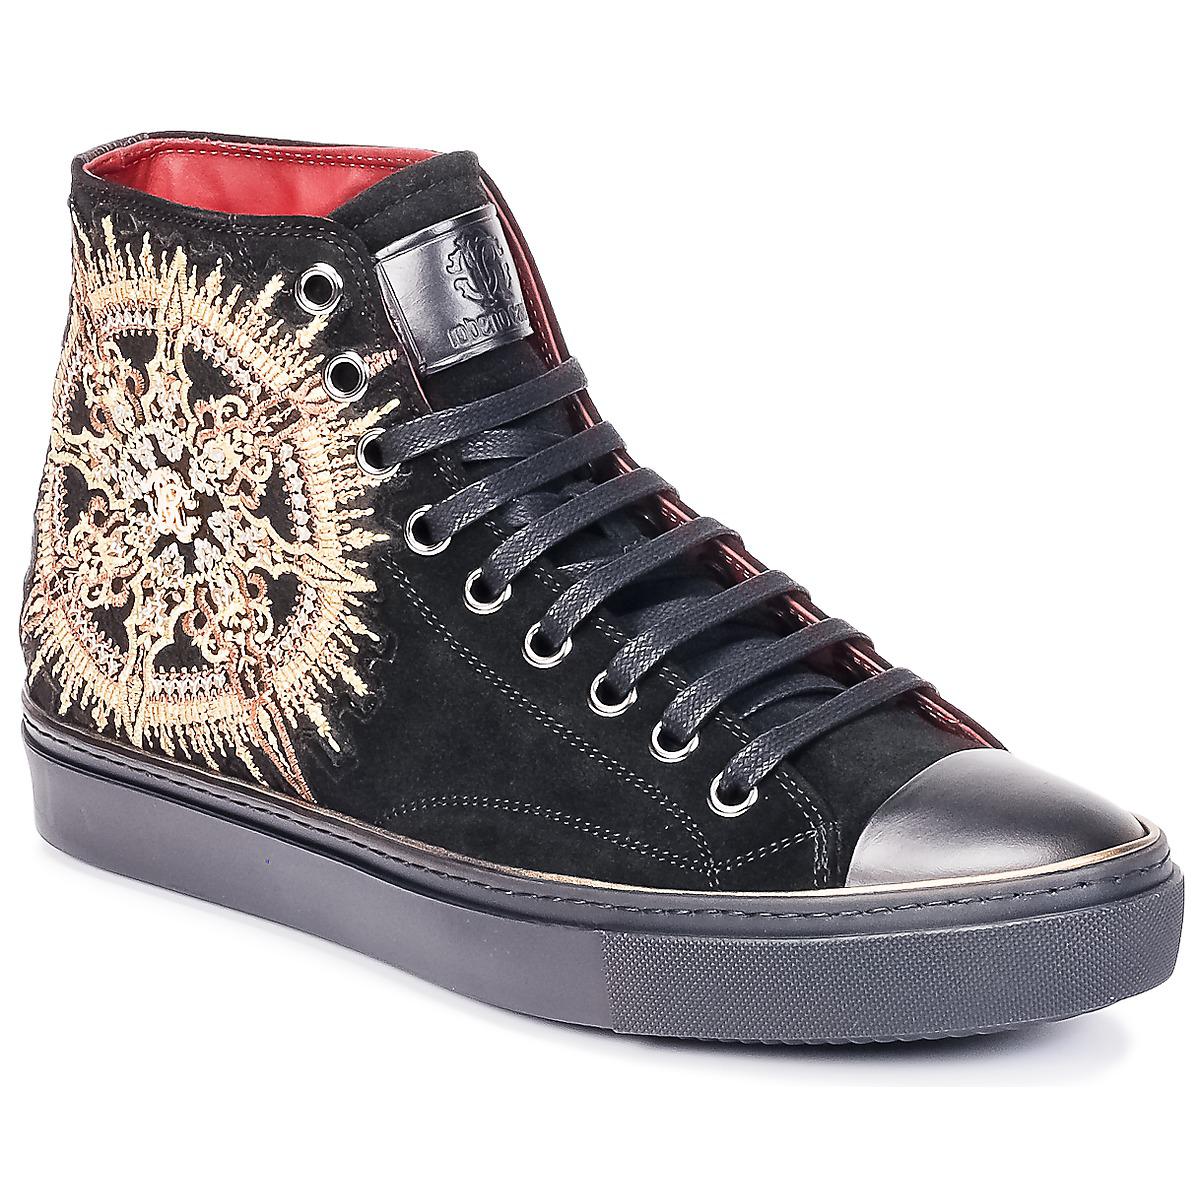 Roberto Cavalli Anero Shoes (high-top Trainers) in Black for Men - Lyst